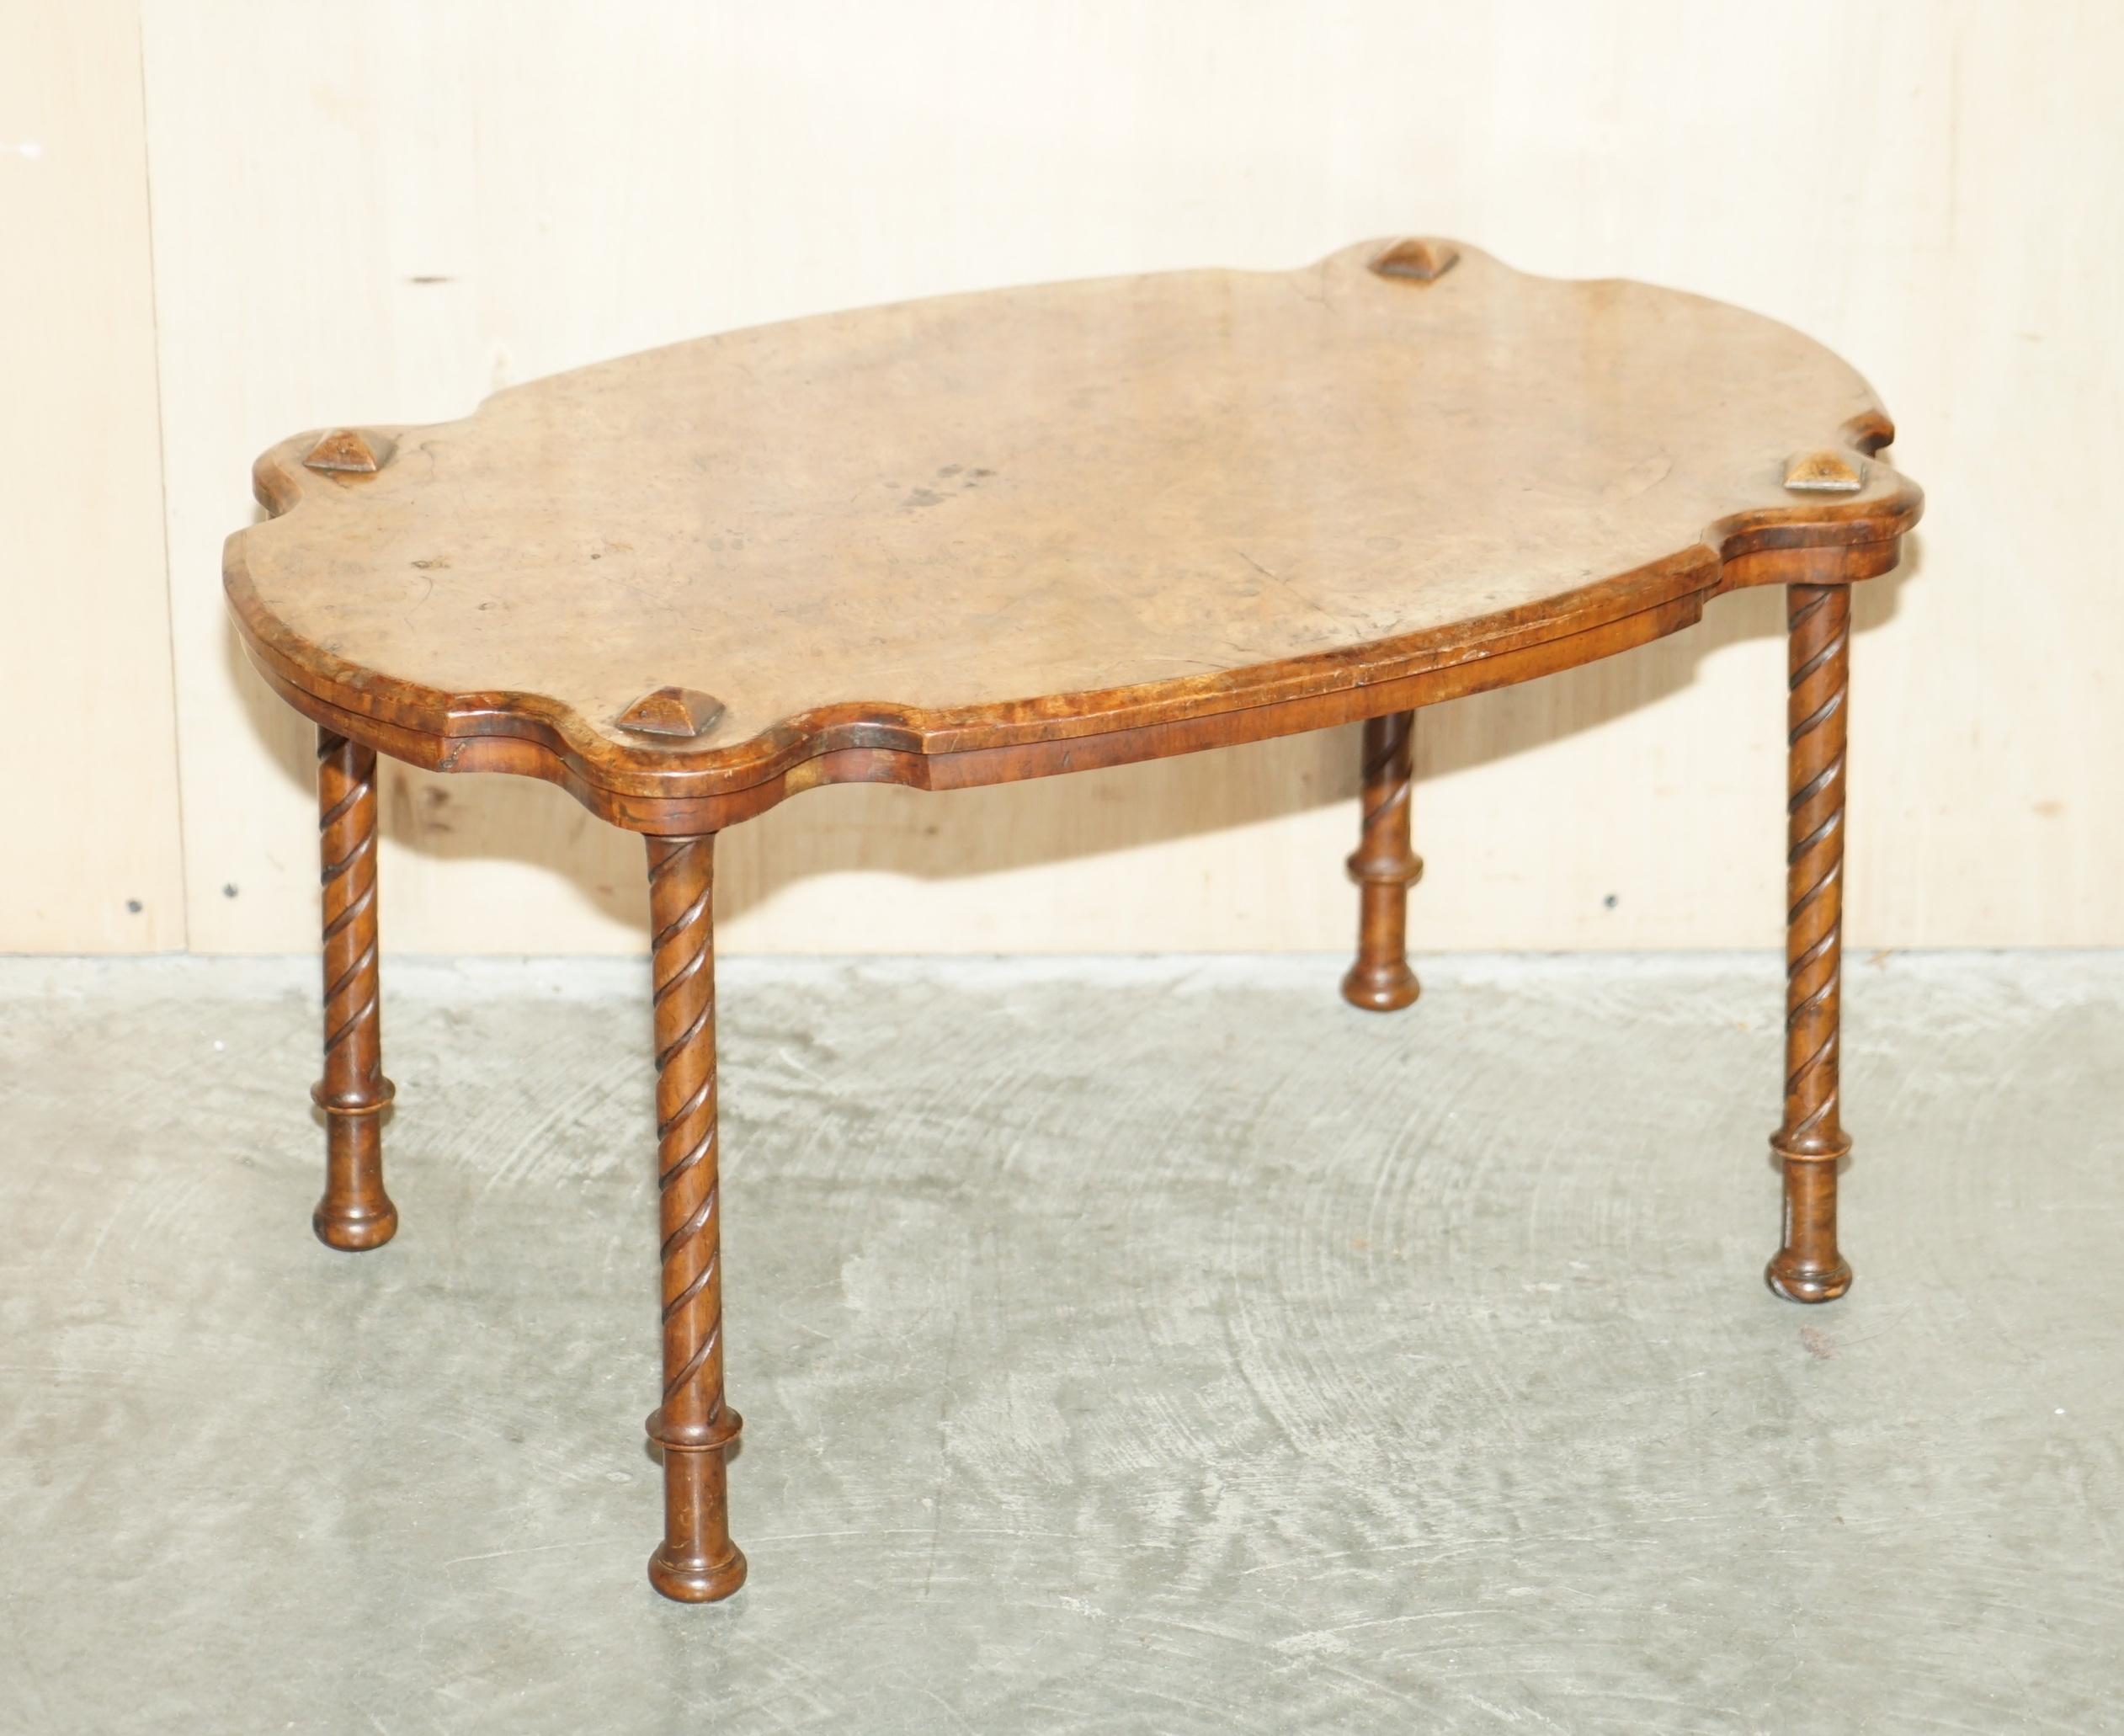 We are delighted to offer for sale this stunning hand made in England circa 1880 burr walnut coffee table with ornately carved twisted legs.

A good looking, well made and decorative coffee table with some of the nicest carvings I have ever seen